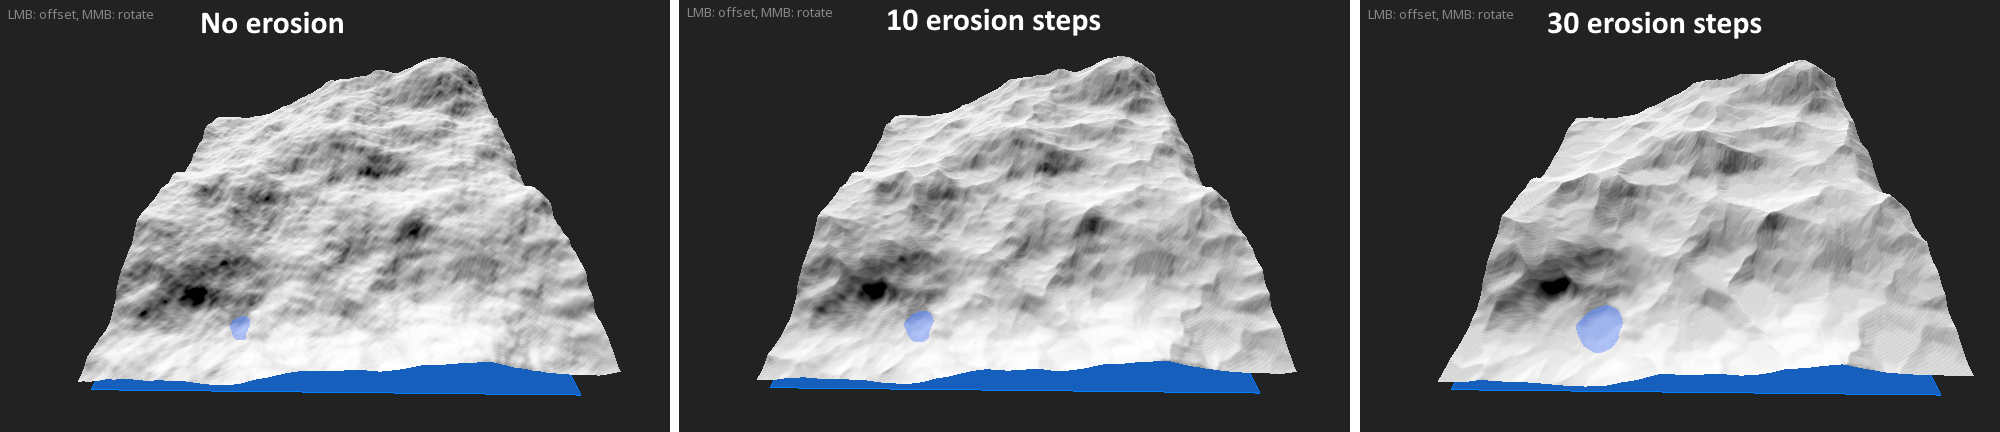 Screenshot with the effect of erosion